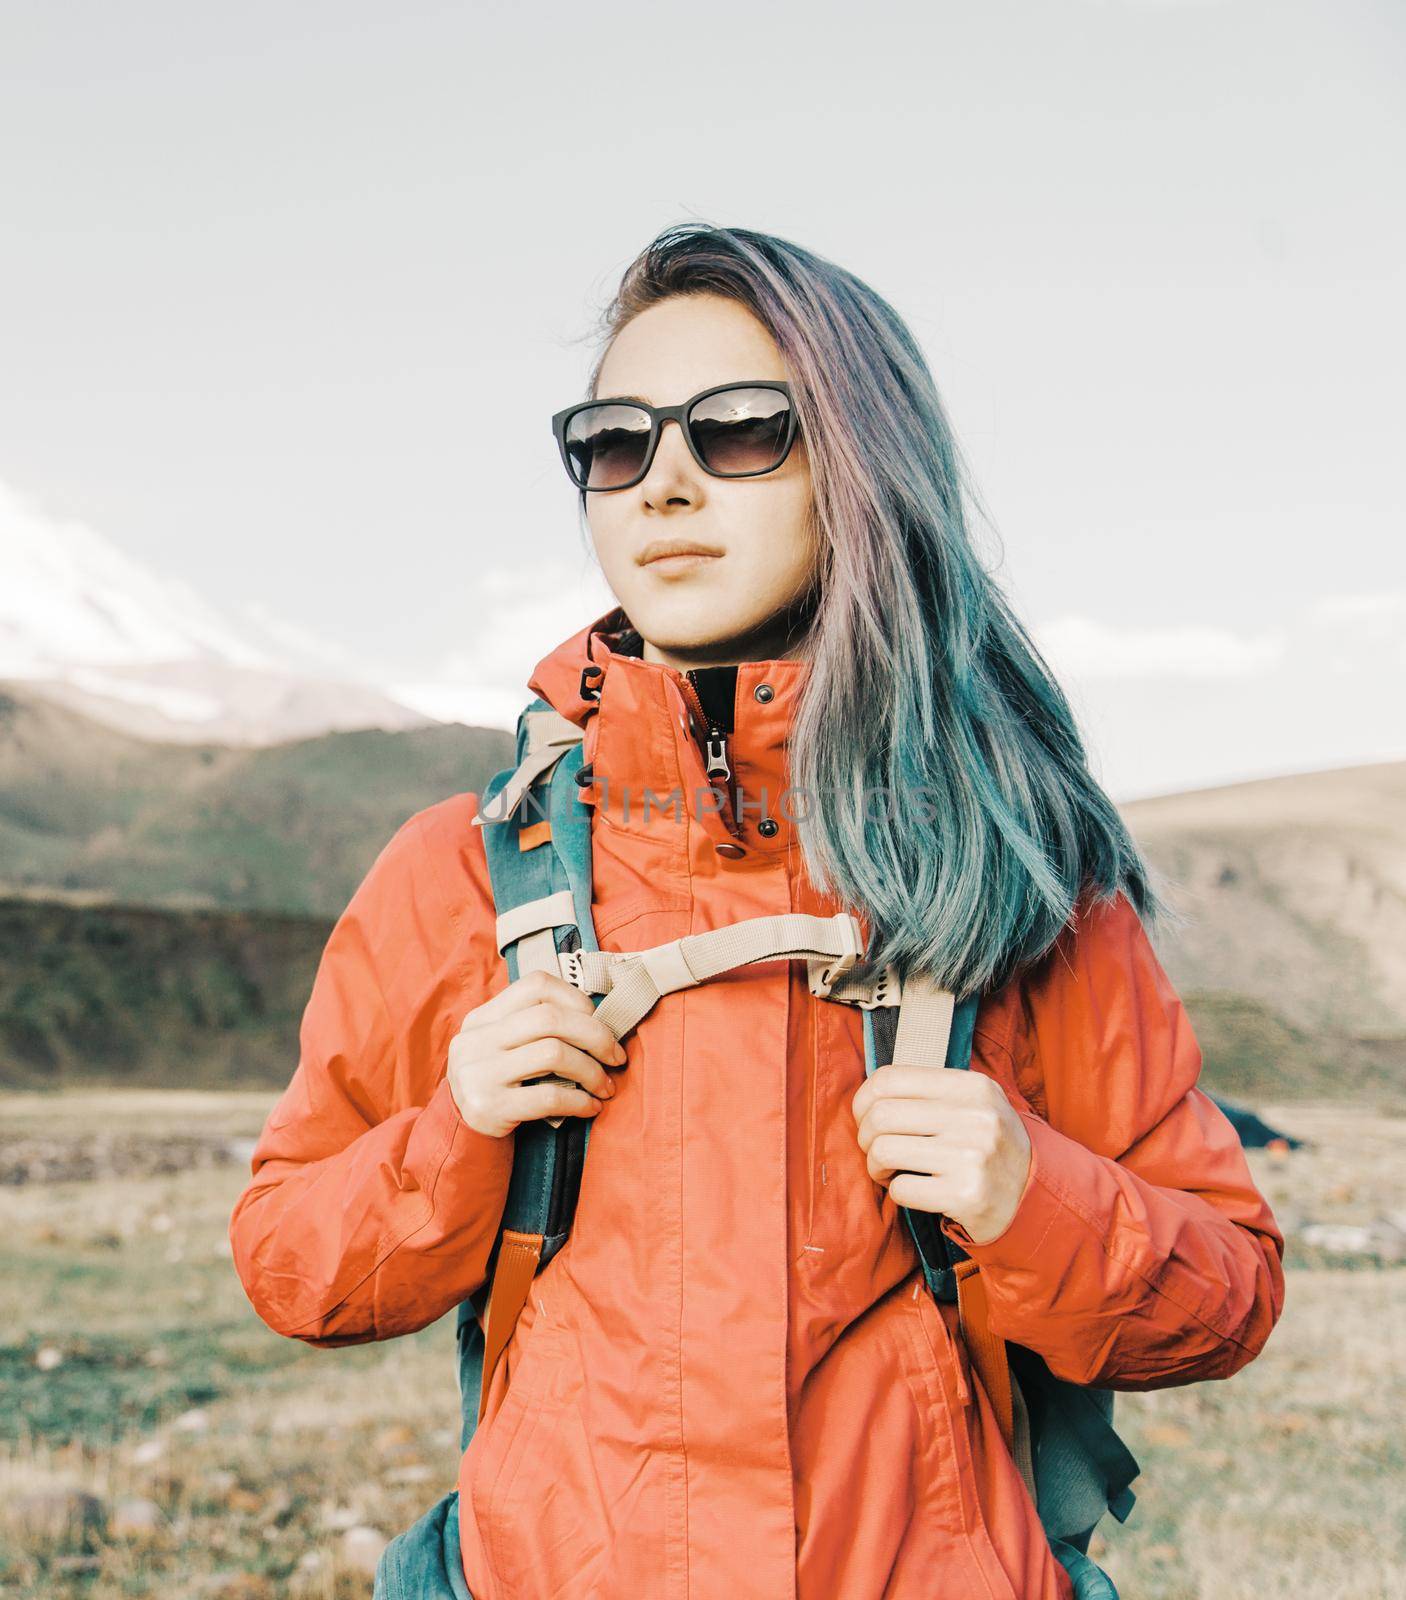 Beautiful hiker explorer young woman with backpack standing in the mountains outdoor.